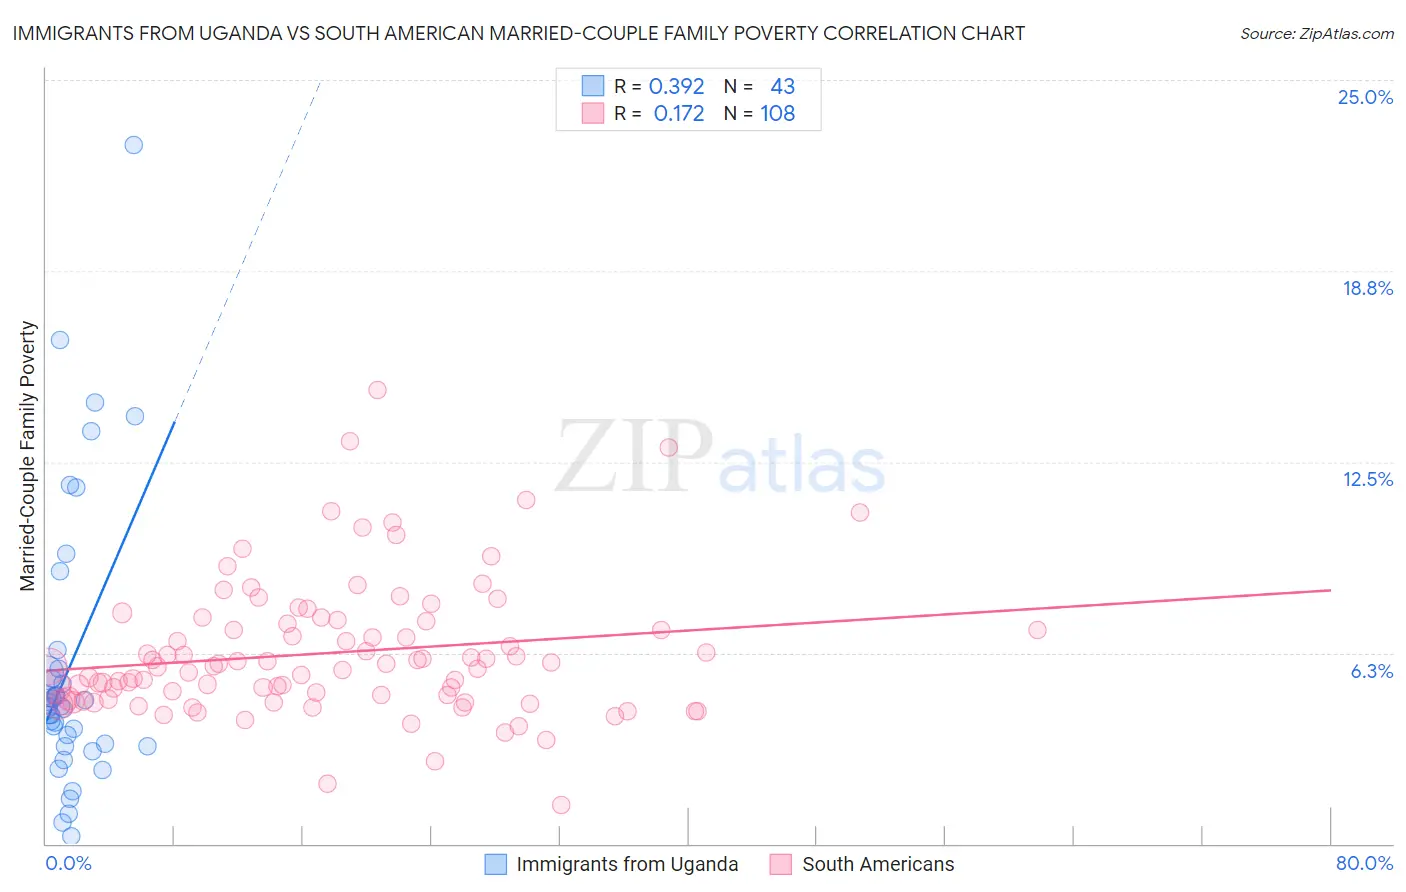 Immigrants from Uganda vs South American Married-Couple Family Poverty